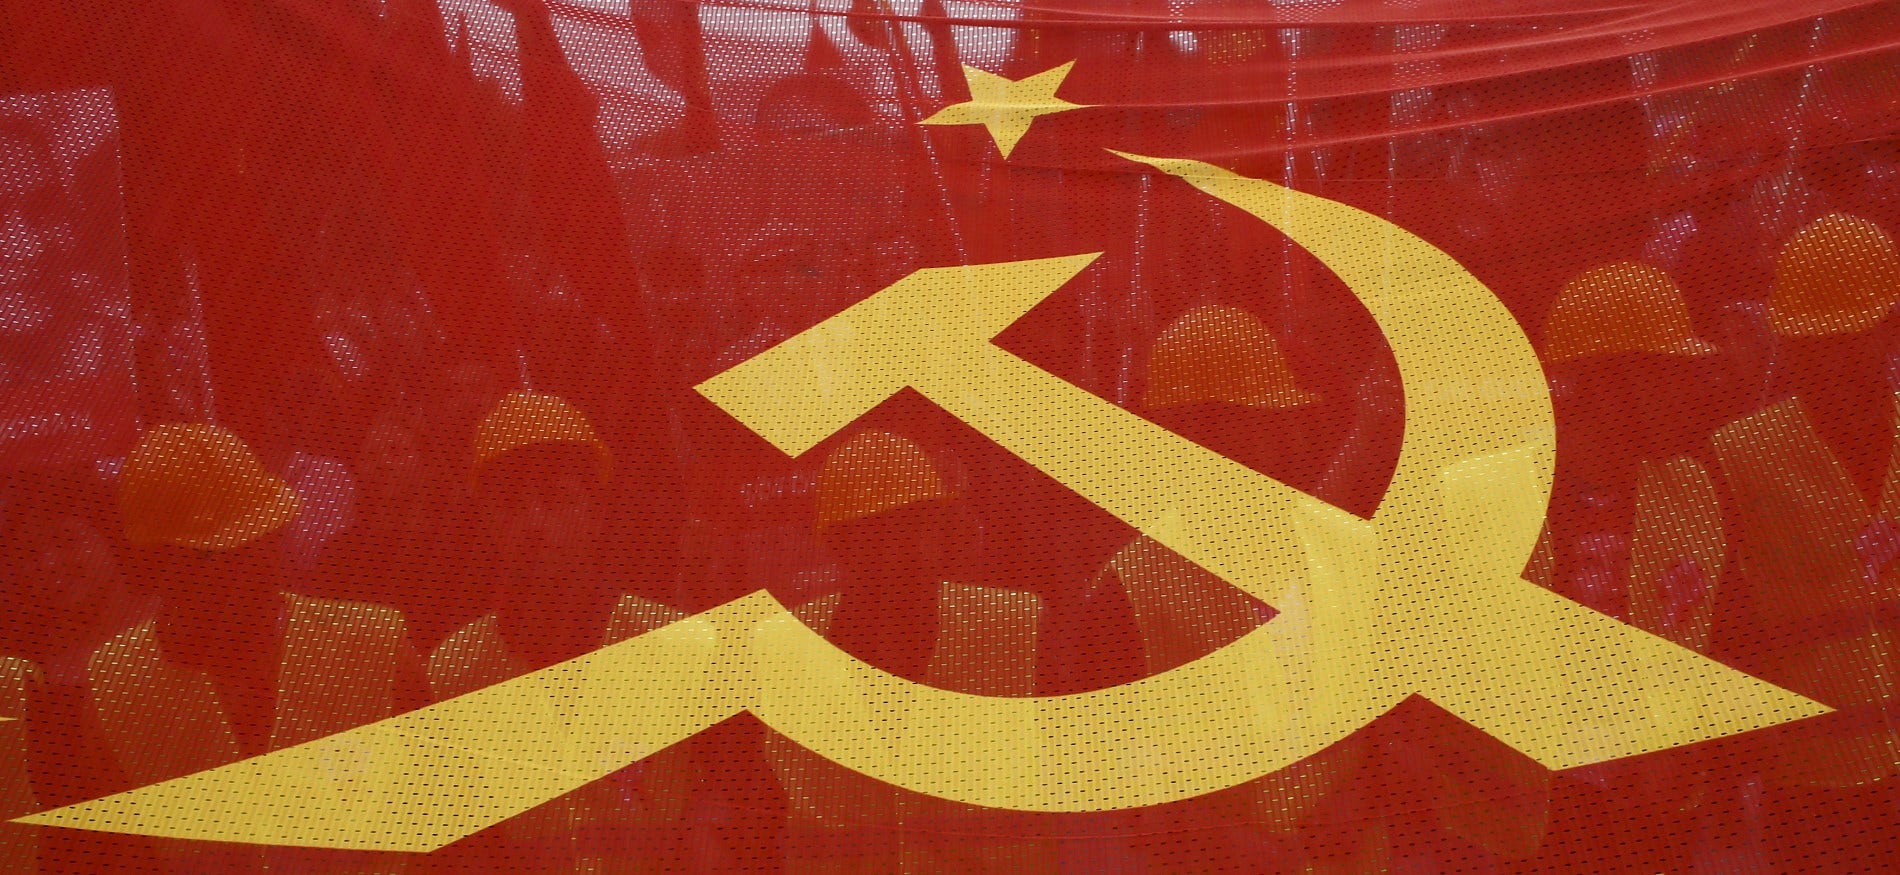 New York Times glowingly profiles ‘convinced Marxist’ politician in Europe: ‘The Communists care’ - Fox News